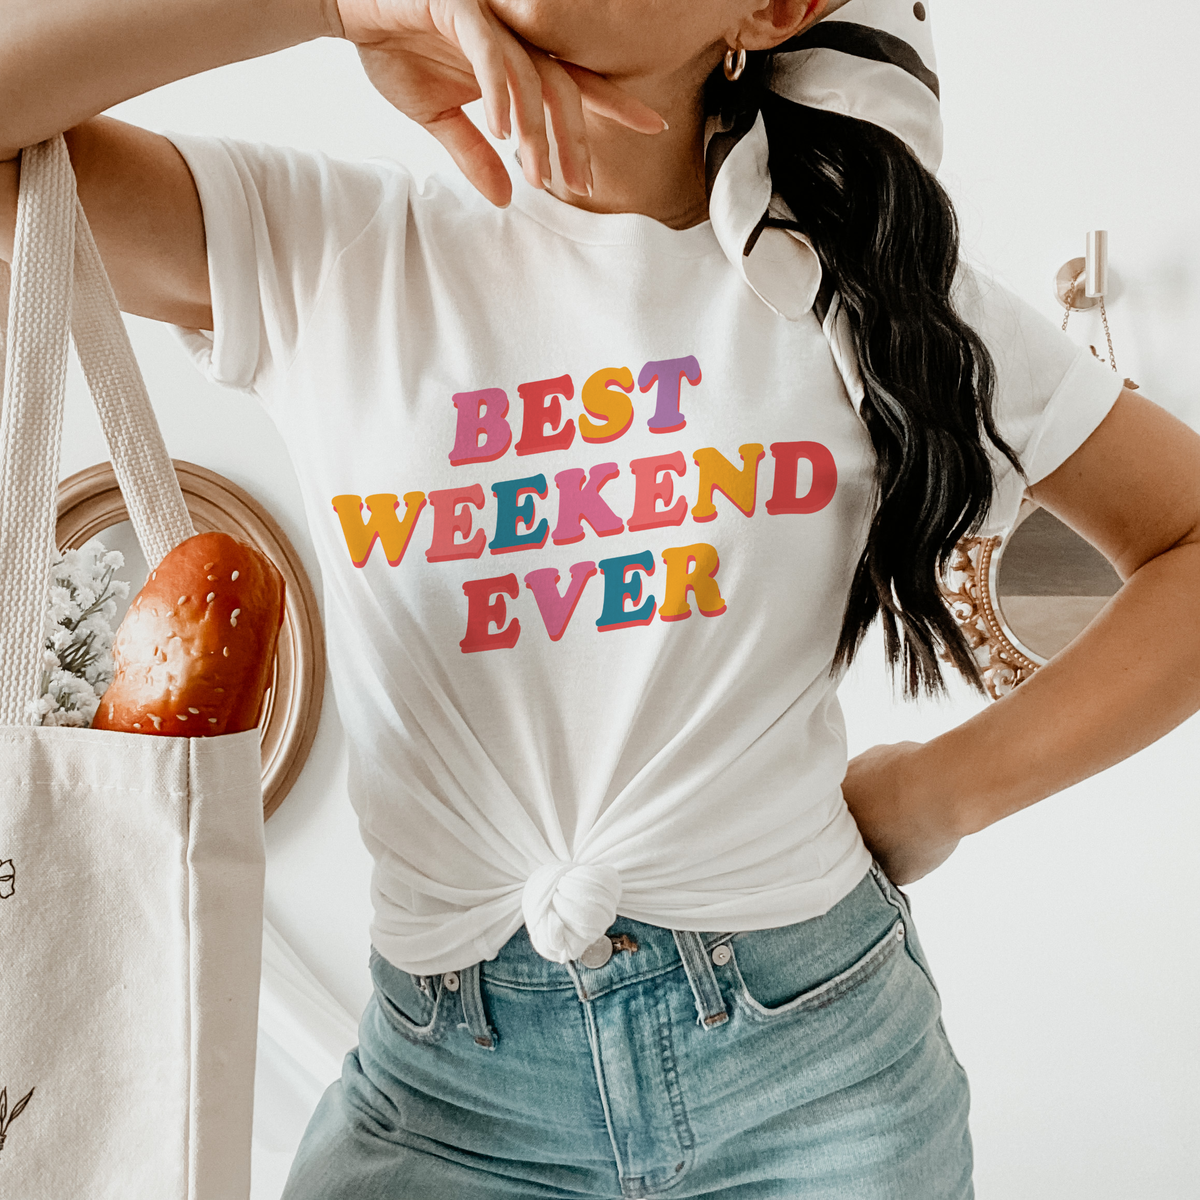 white shirt that says best weekend ever - HighCiti